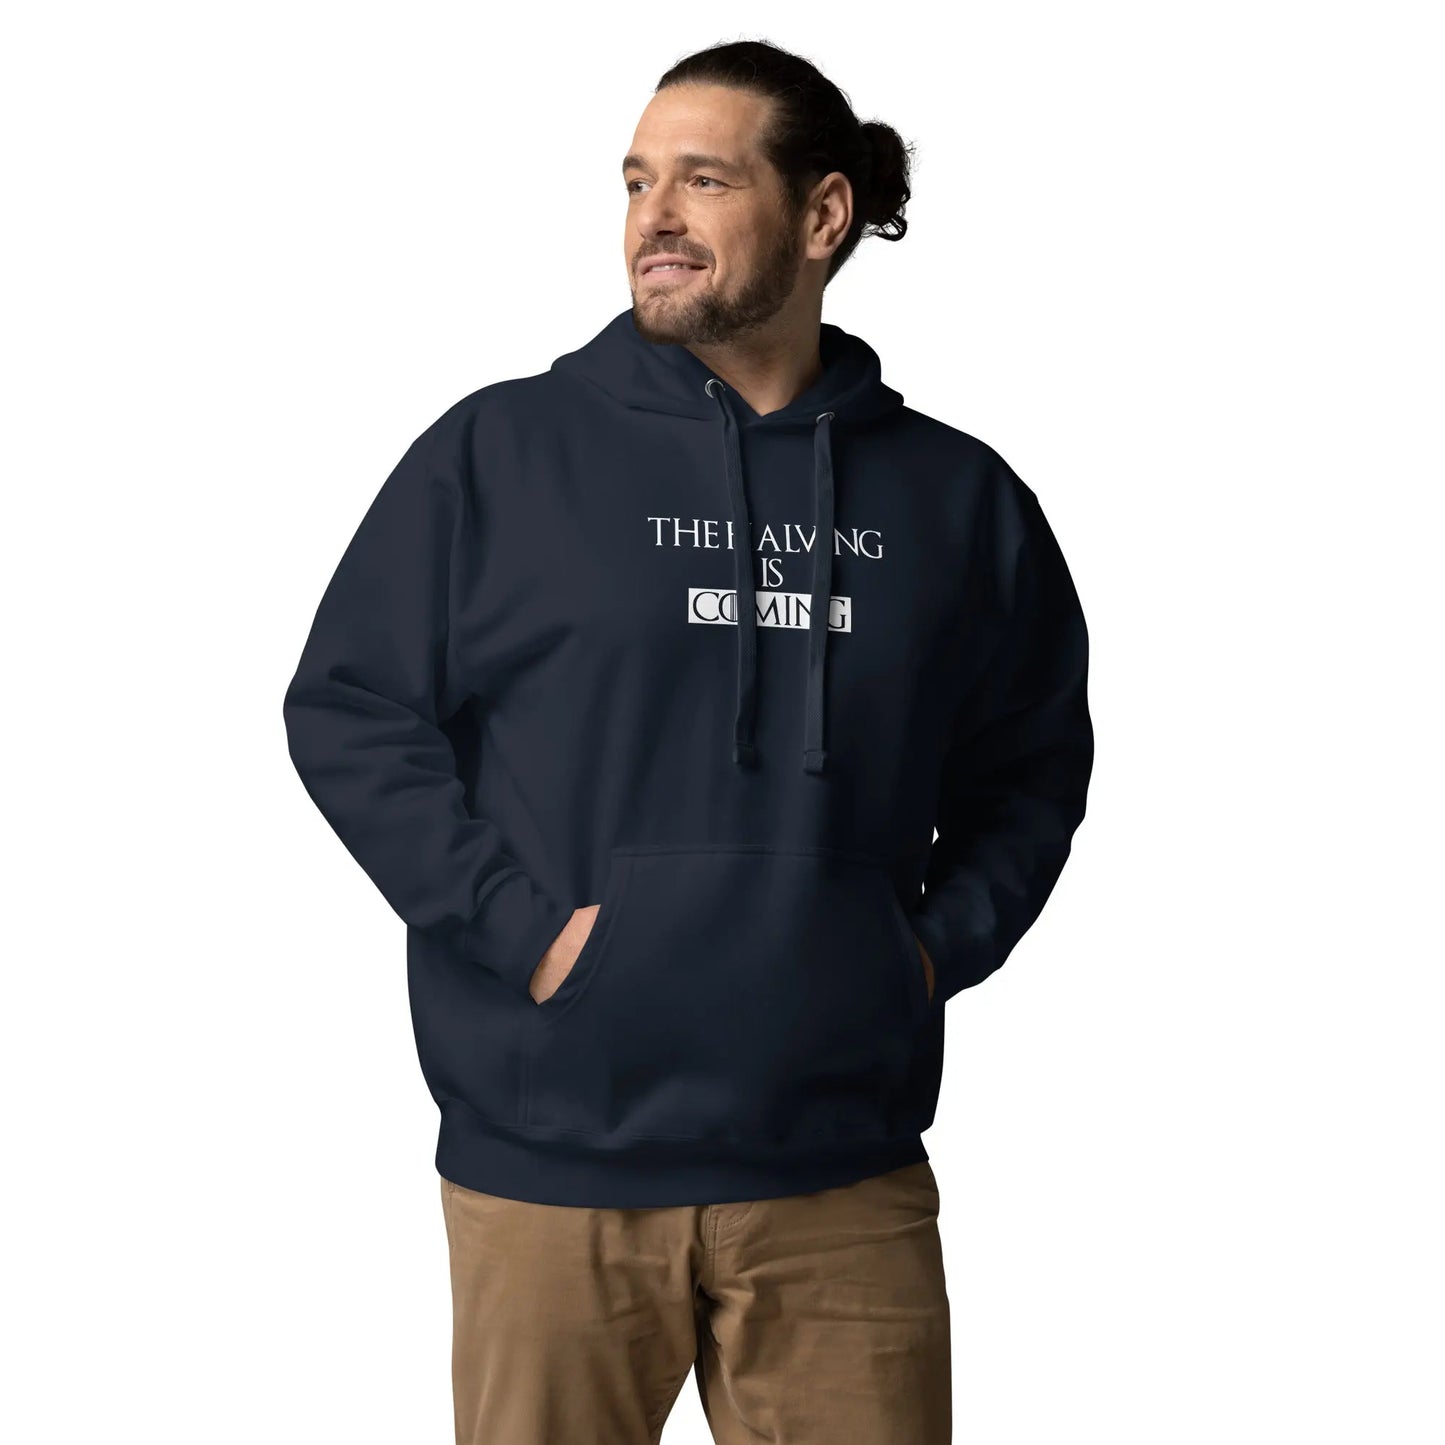 The Halving Is Coming - Premium Unisex Bitcoin Hoodie Navy Blue Color